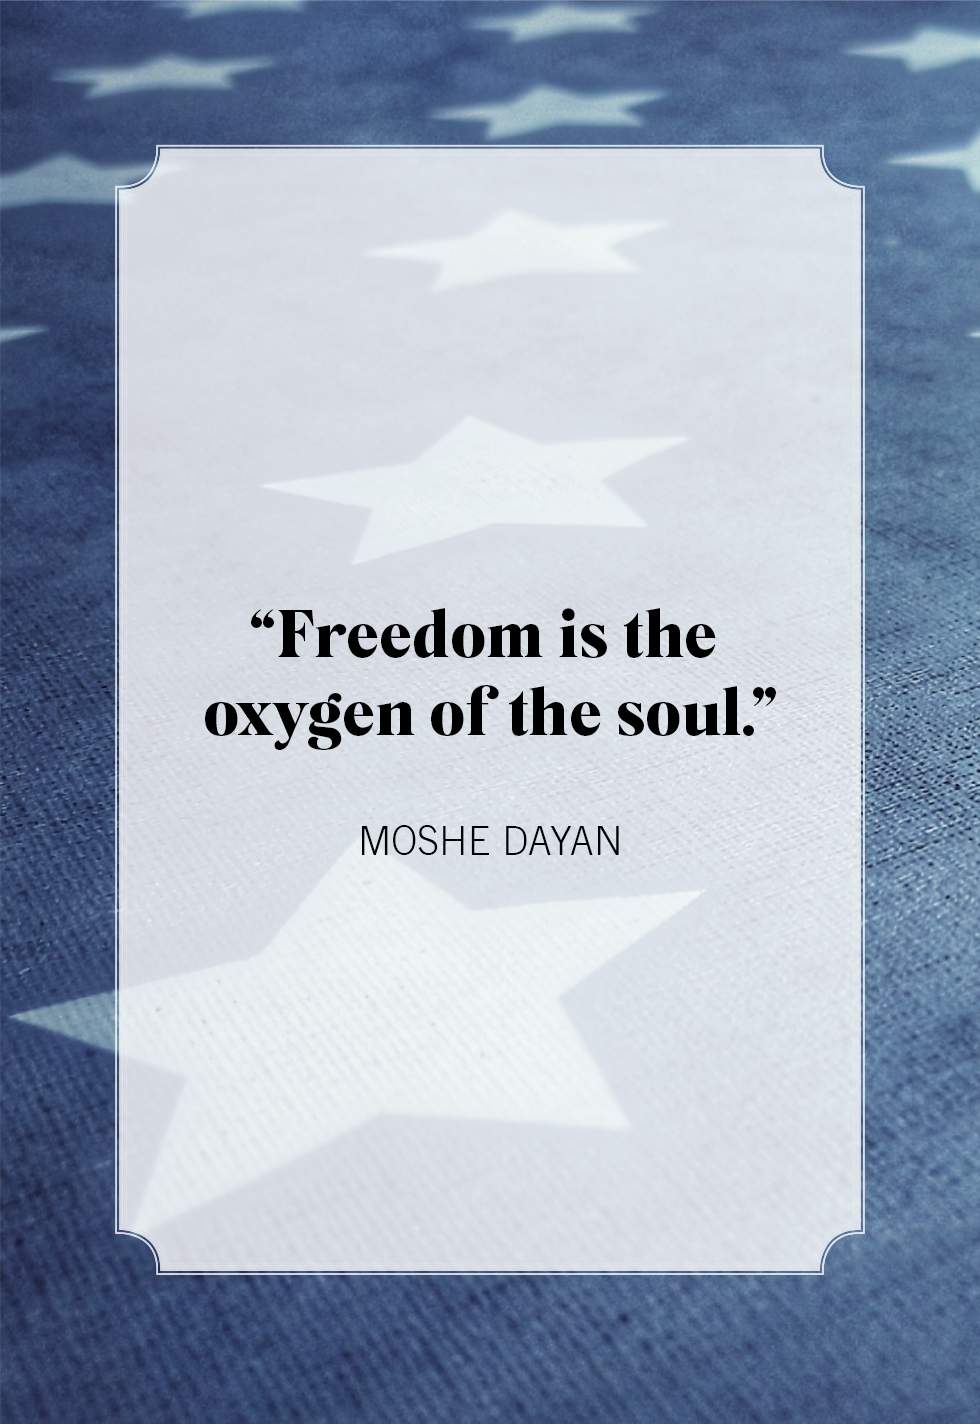 freedom quotes and sayings